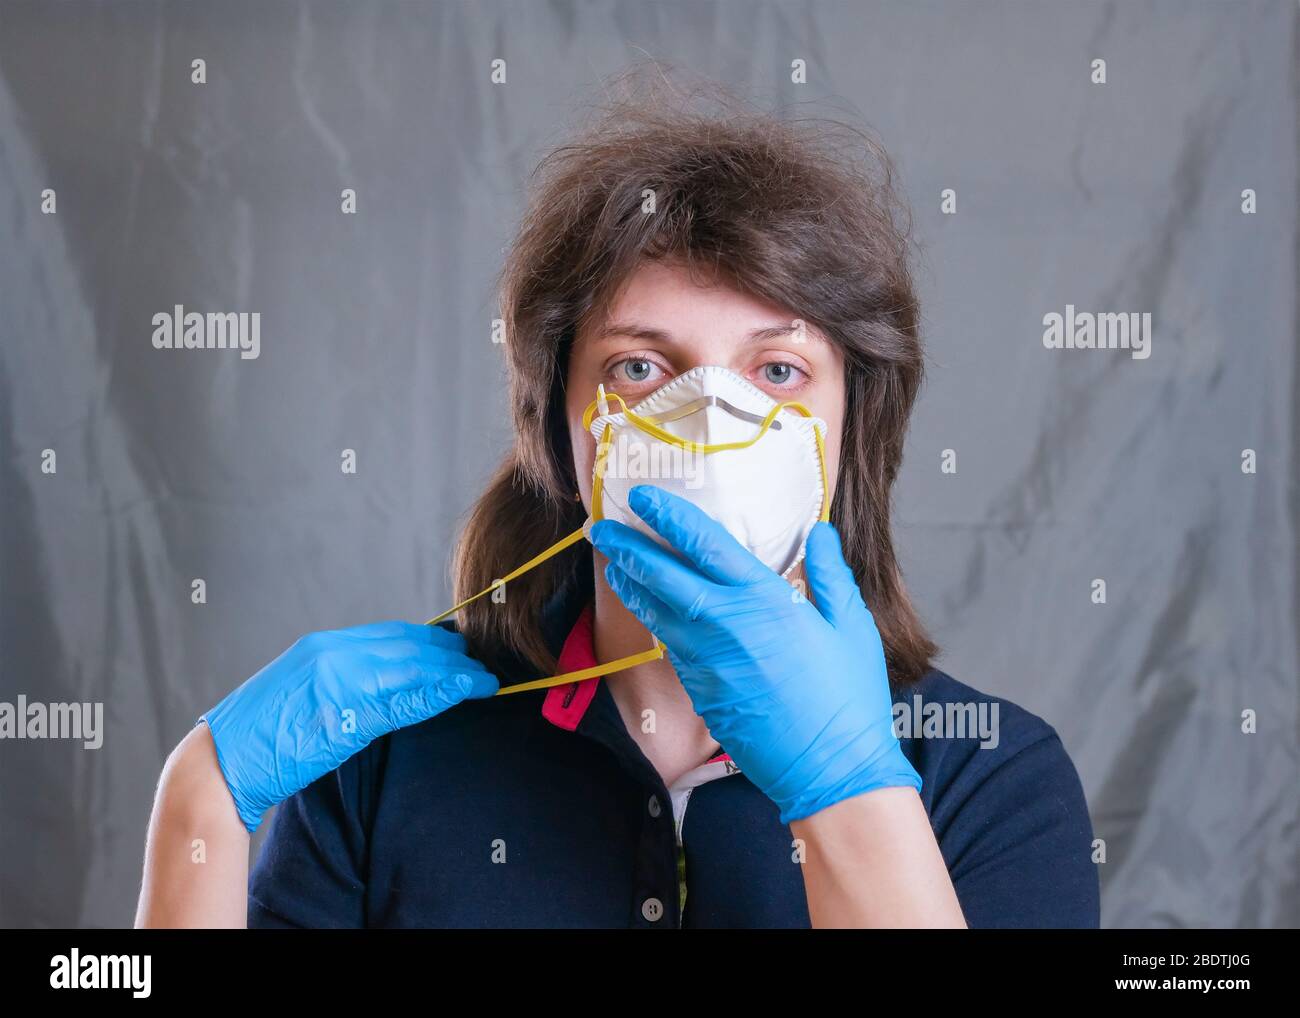 Young woman in protective respirator mask and blue gloves during self ...